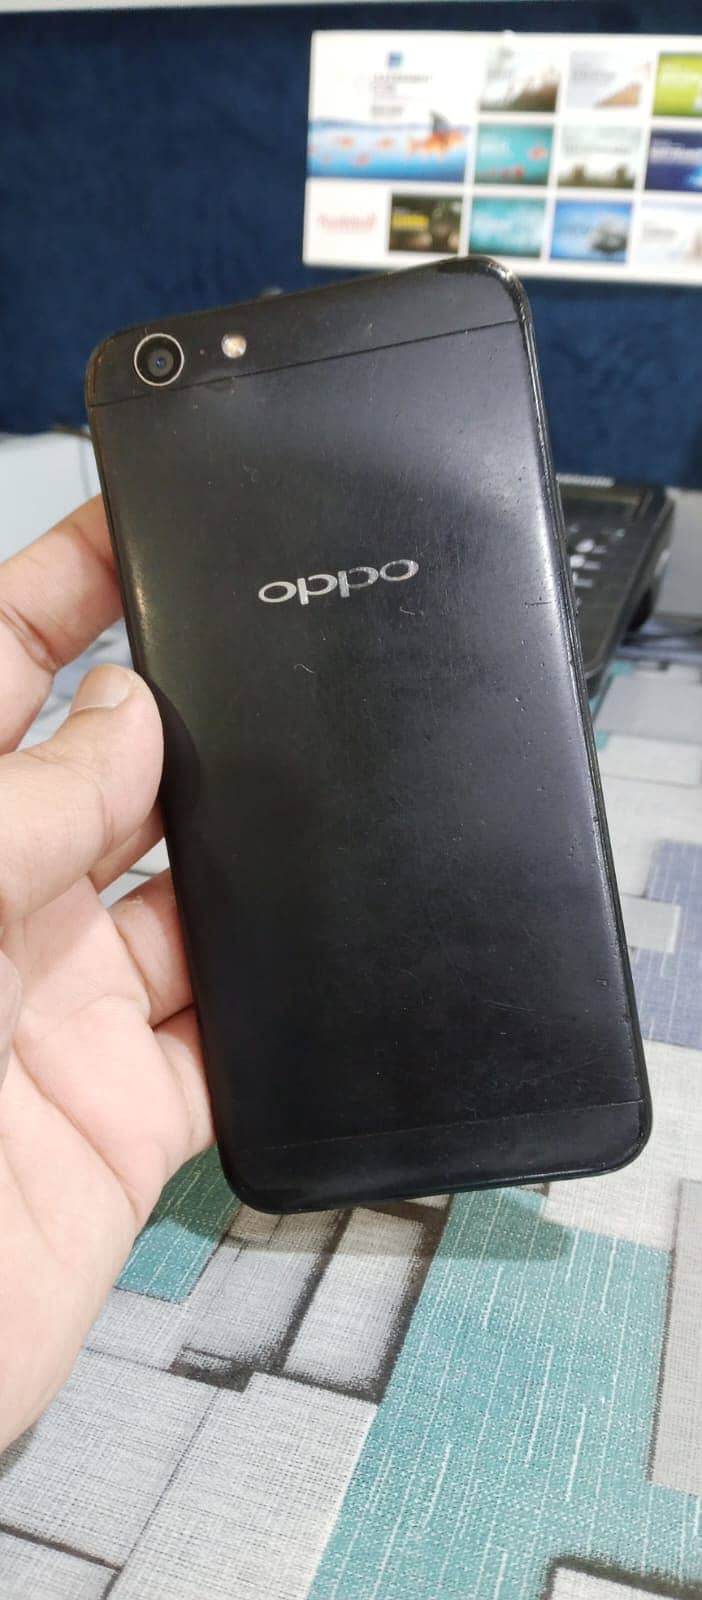 OPPO A57 4G 32gb (3 gb RAM) FOR SALE 1